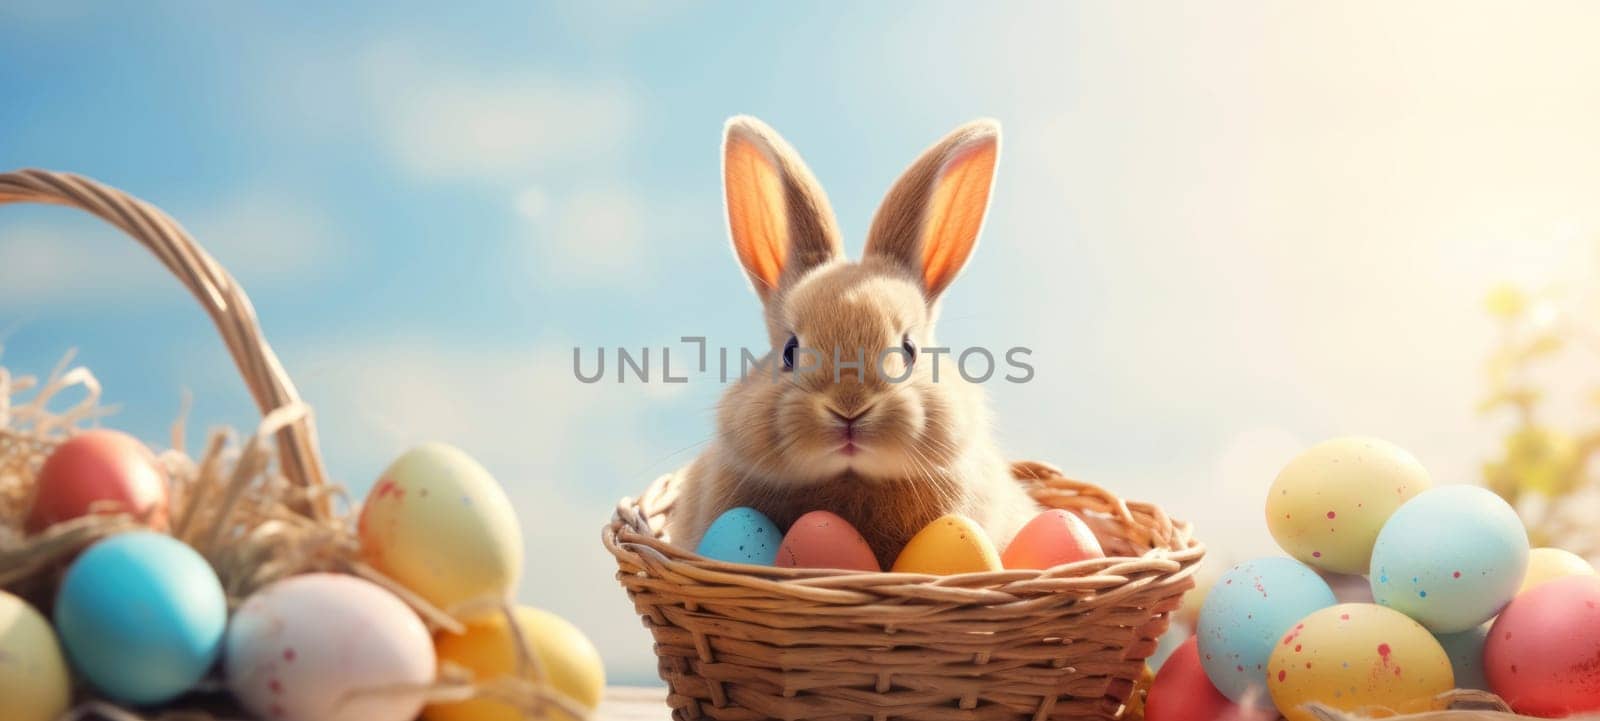 Adorable Bunny with Colorful Easter Eggs in a Wicker Basket.